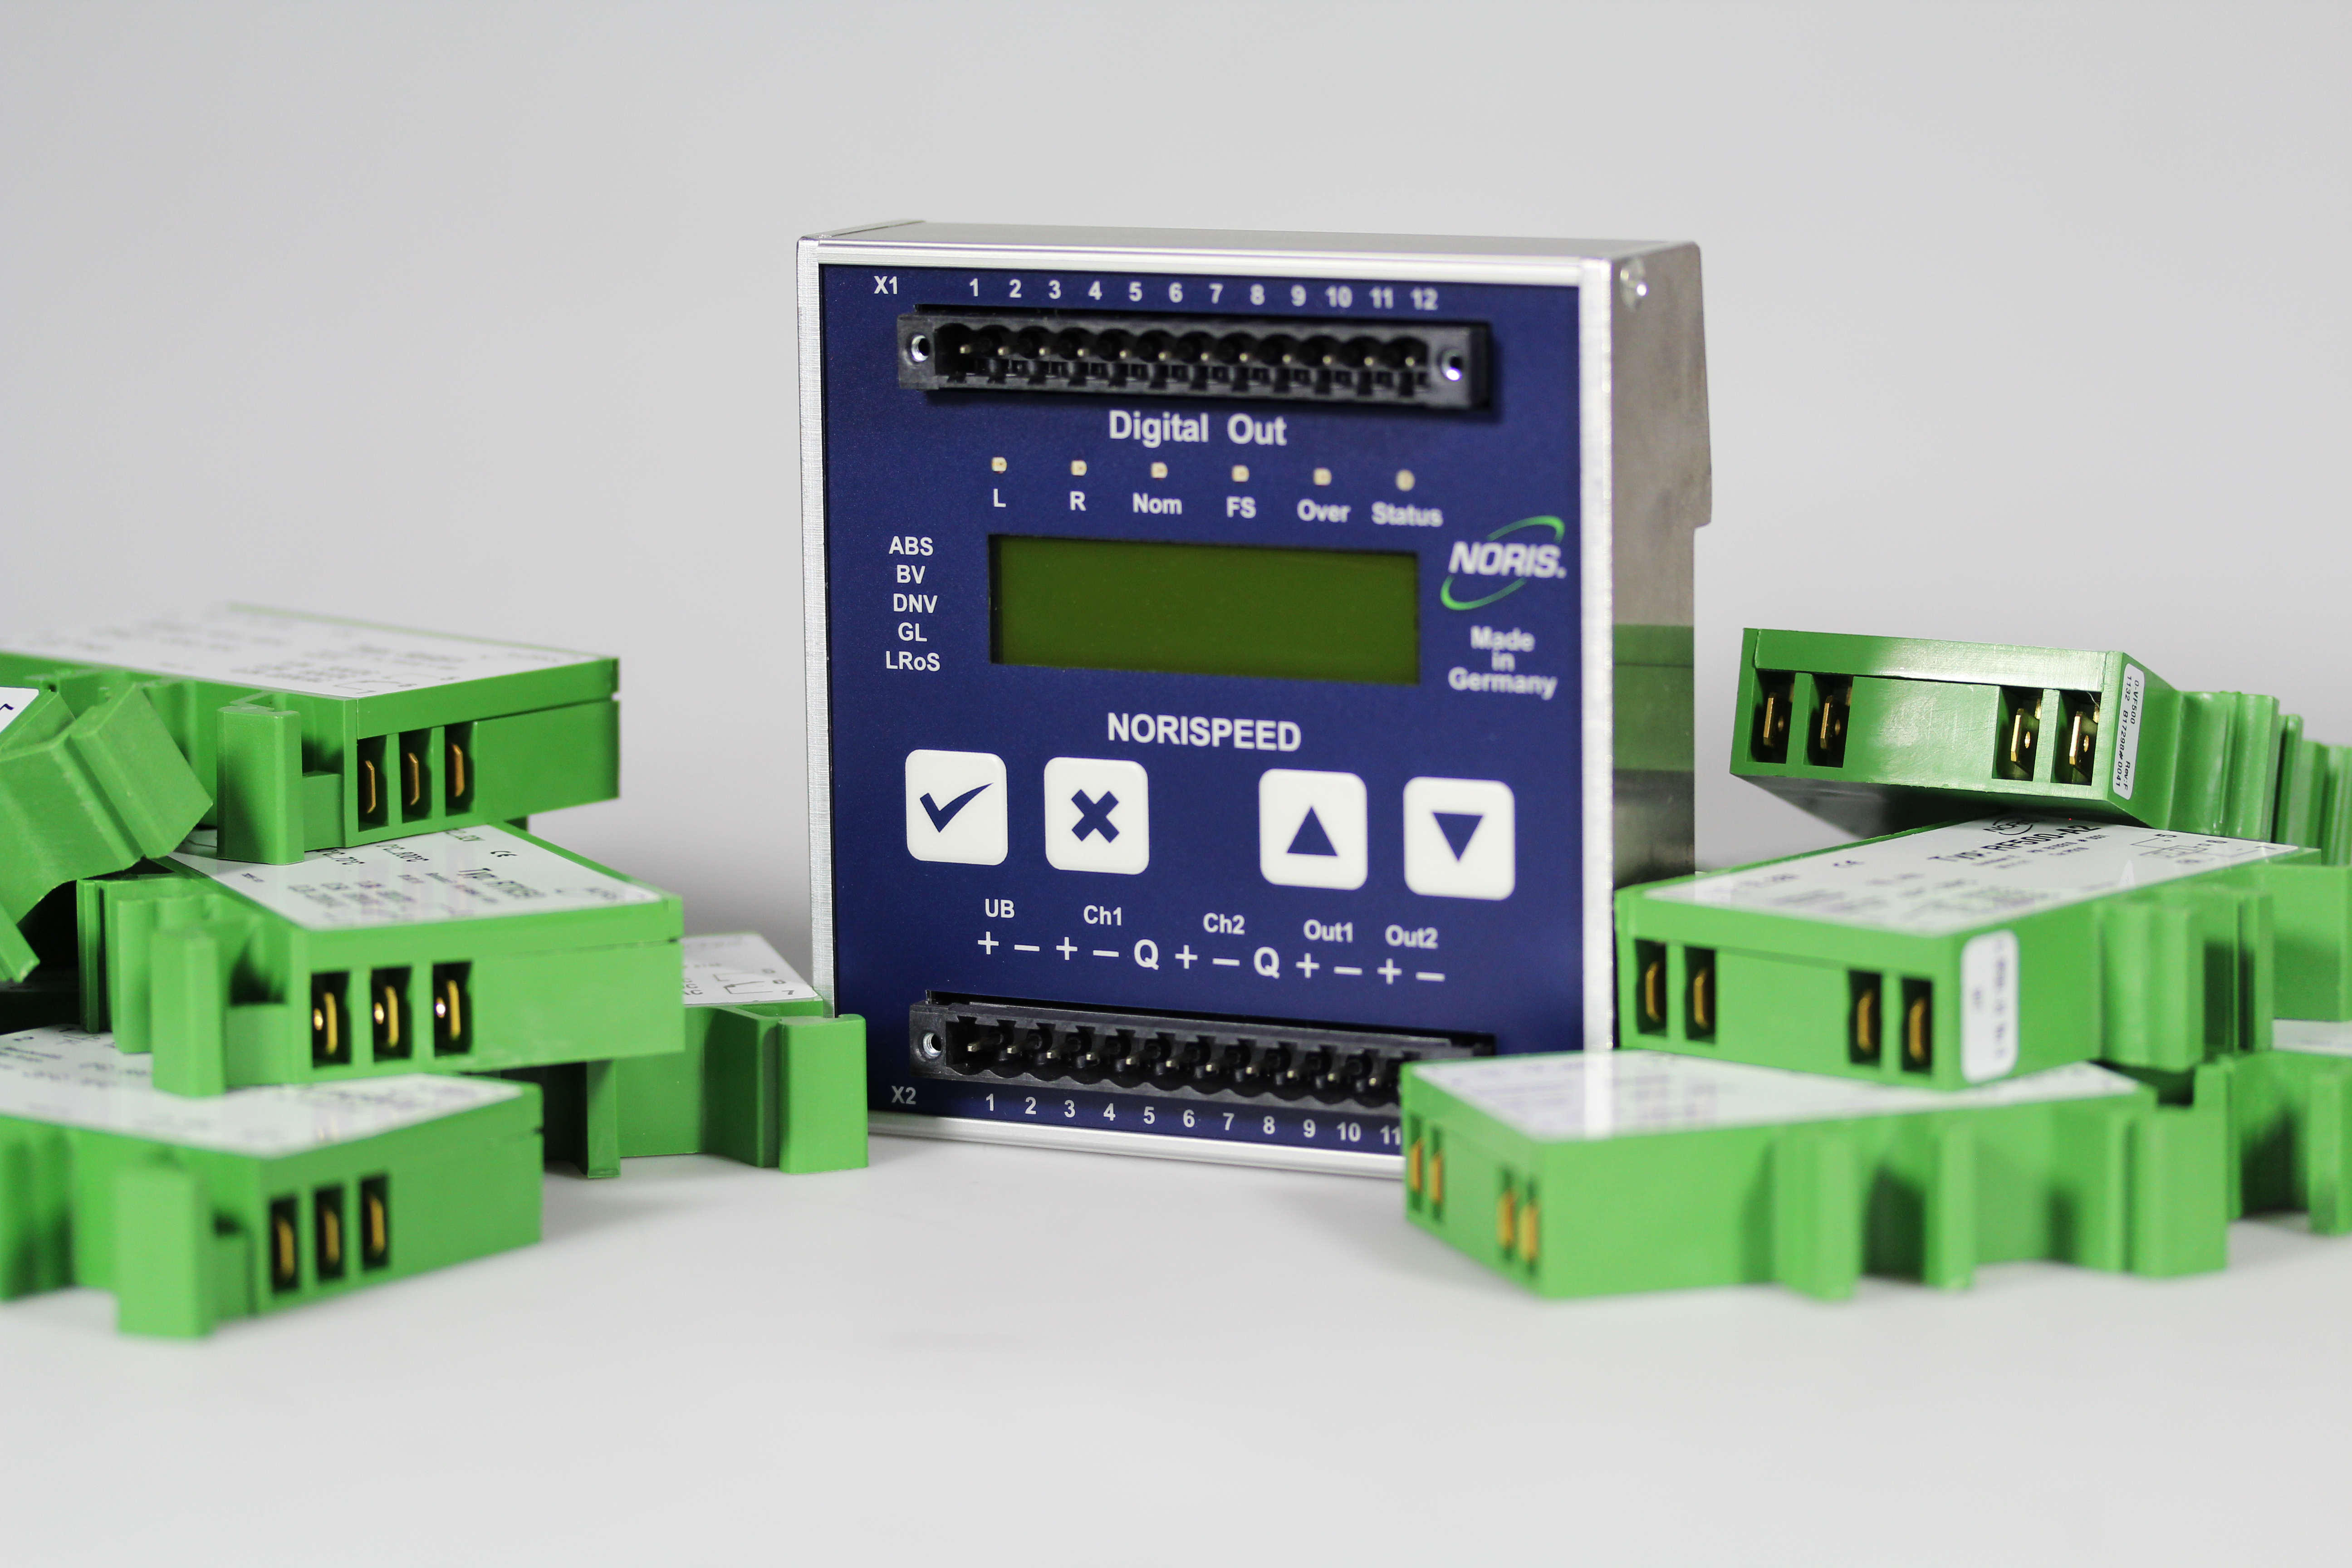 The image shows different green and blue signal processing devices laying on a grey background.